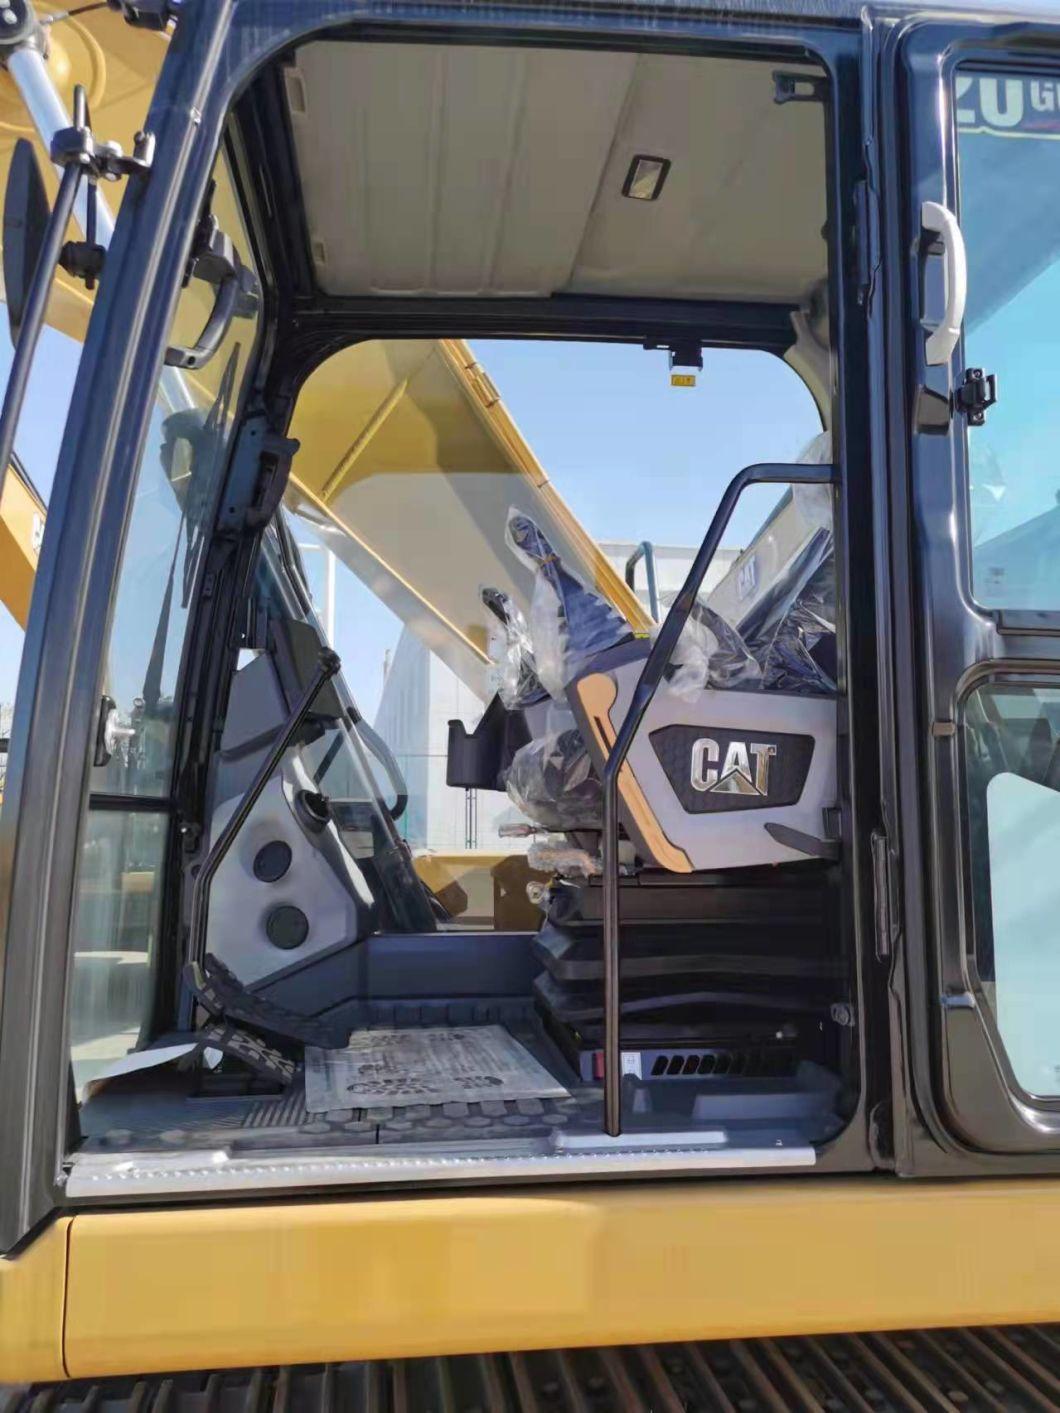 Cat320gc 20ton 148HP Small Excavator for Sale